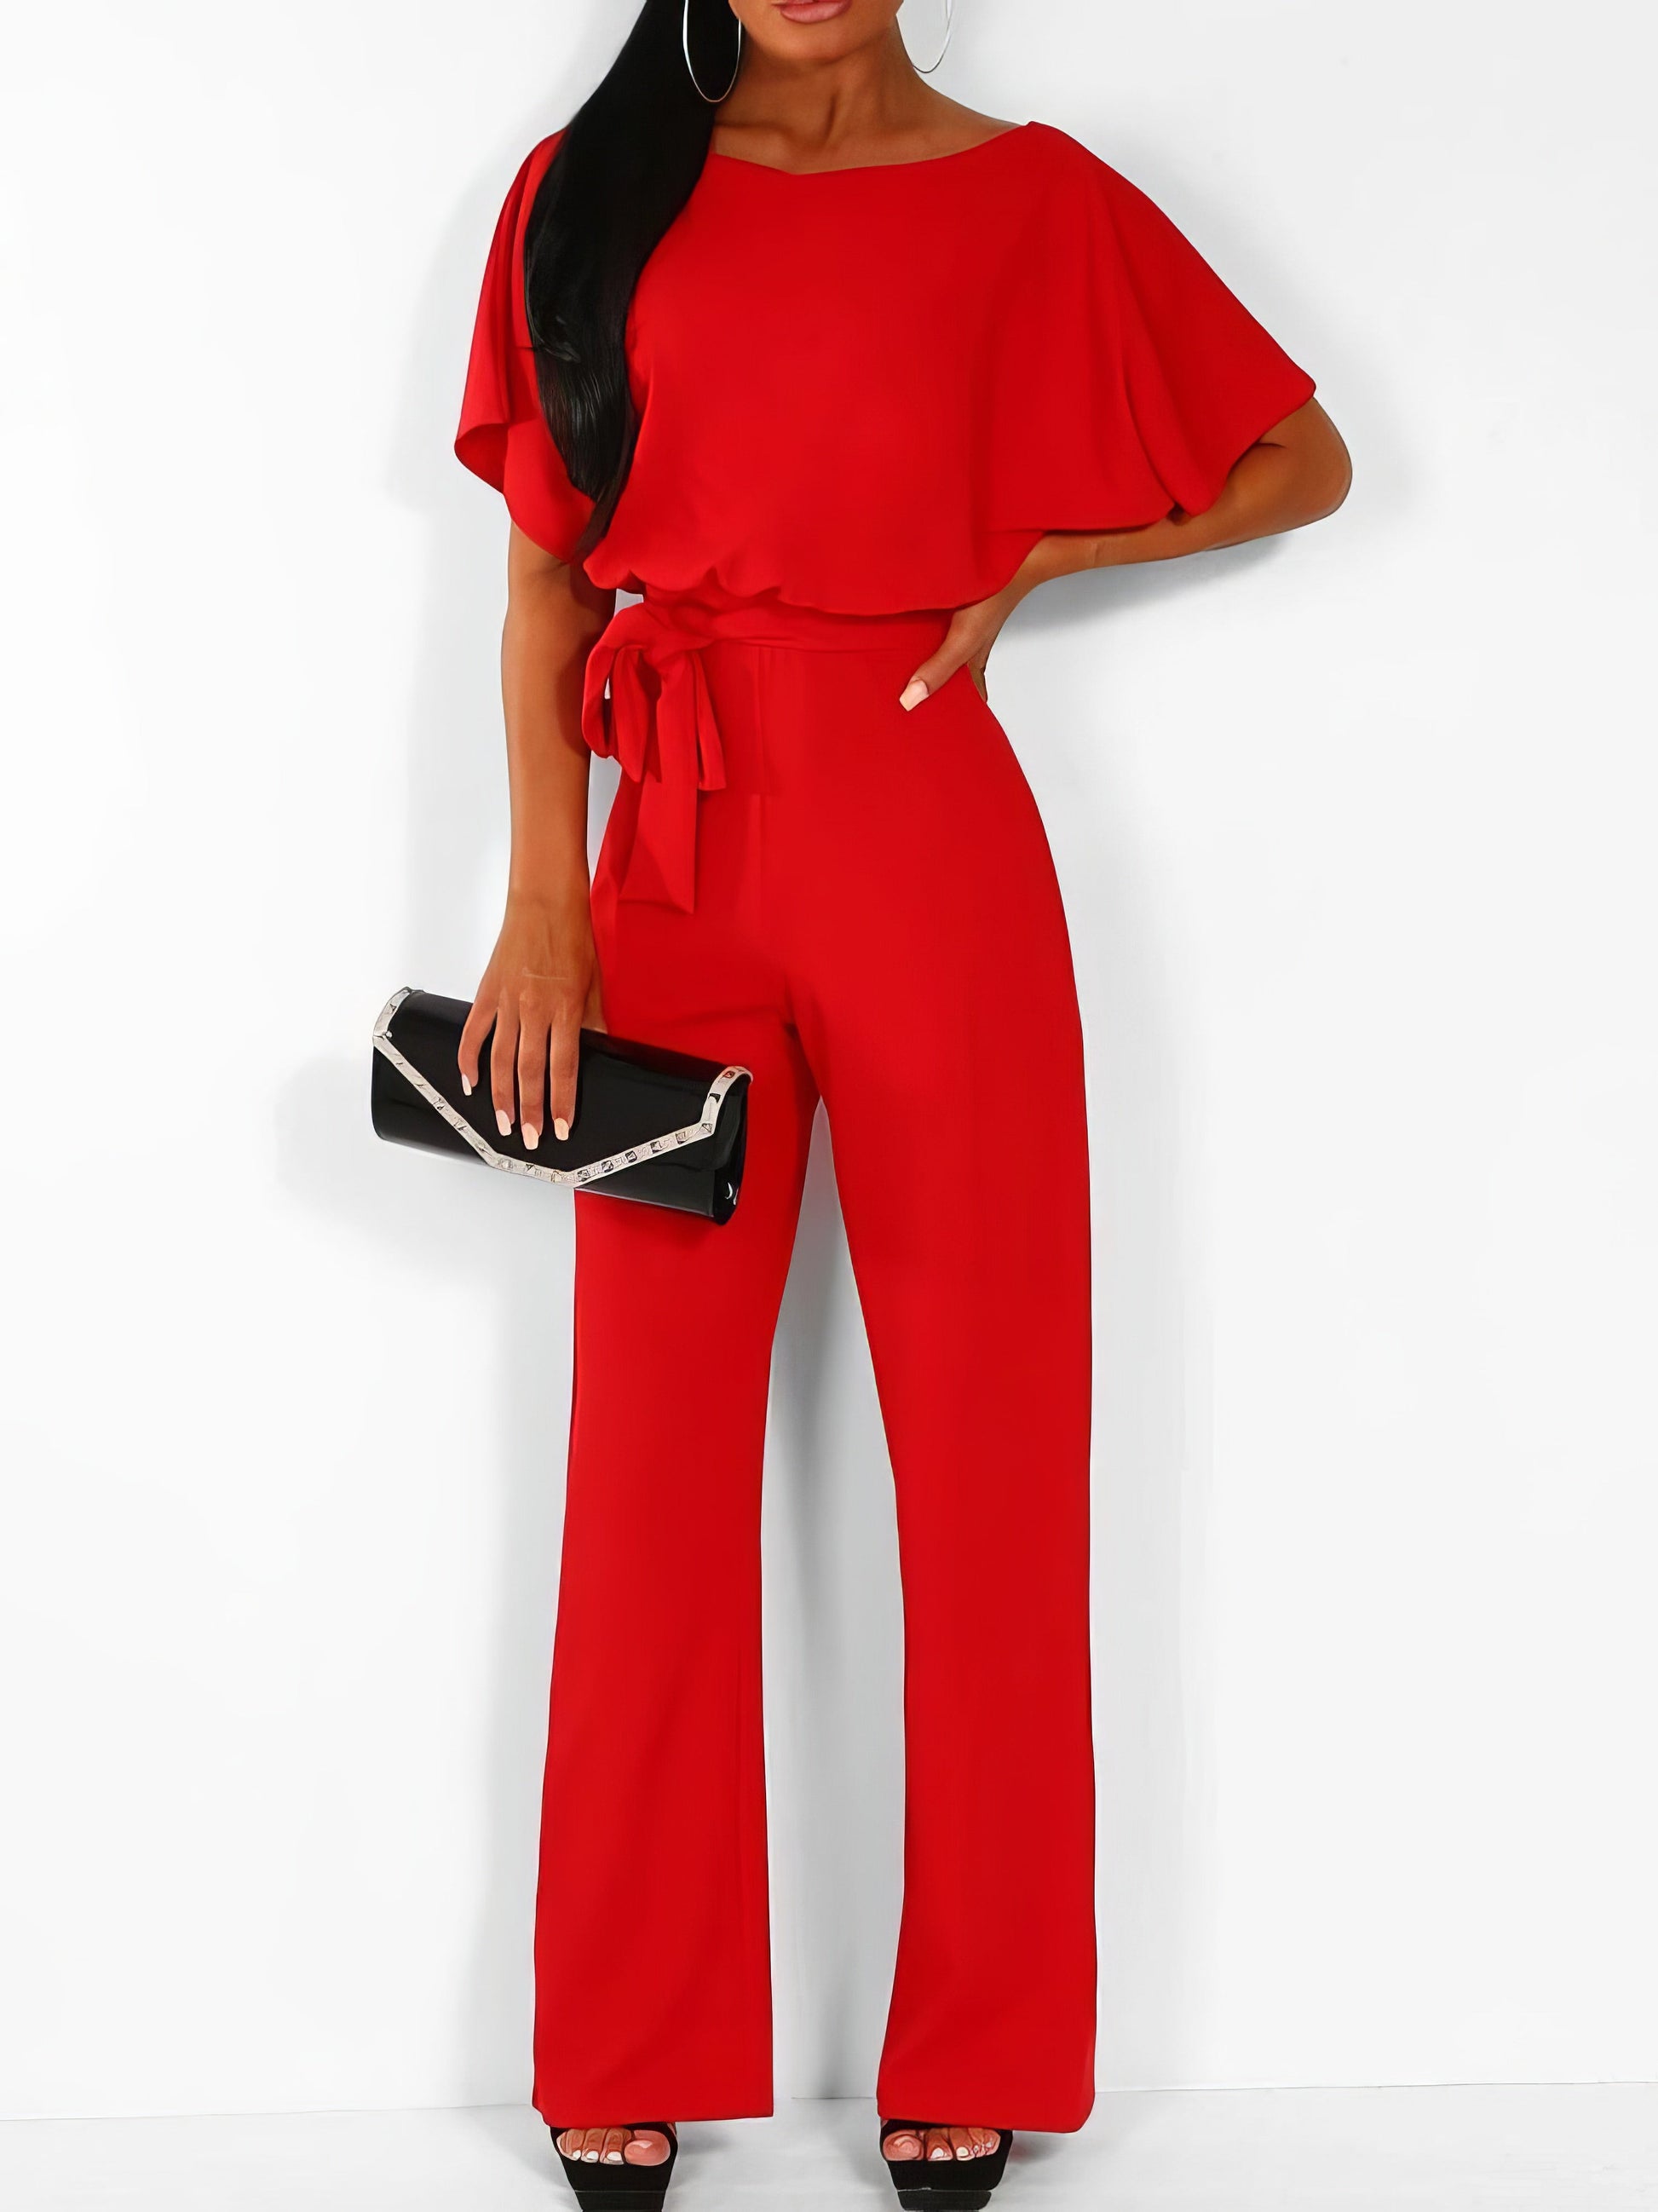 Jumpsuits - Solid Lace-up Short-sleeved Women's Jumpsuit - MsDressly